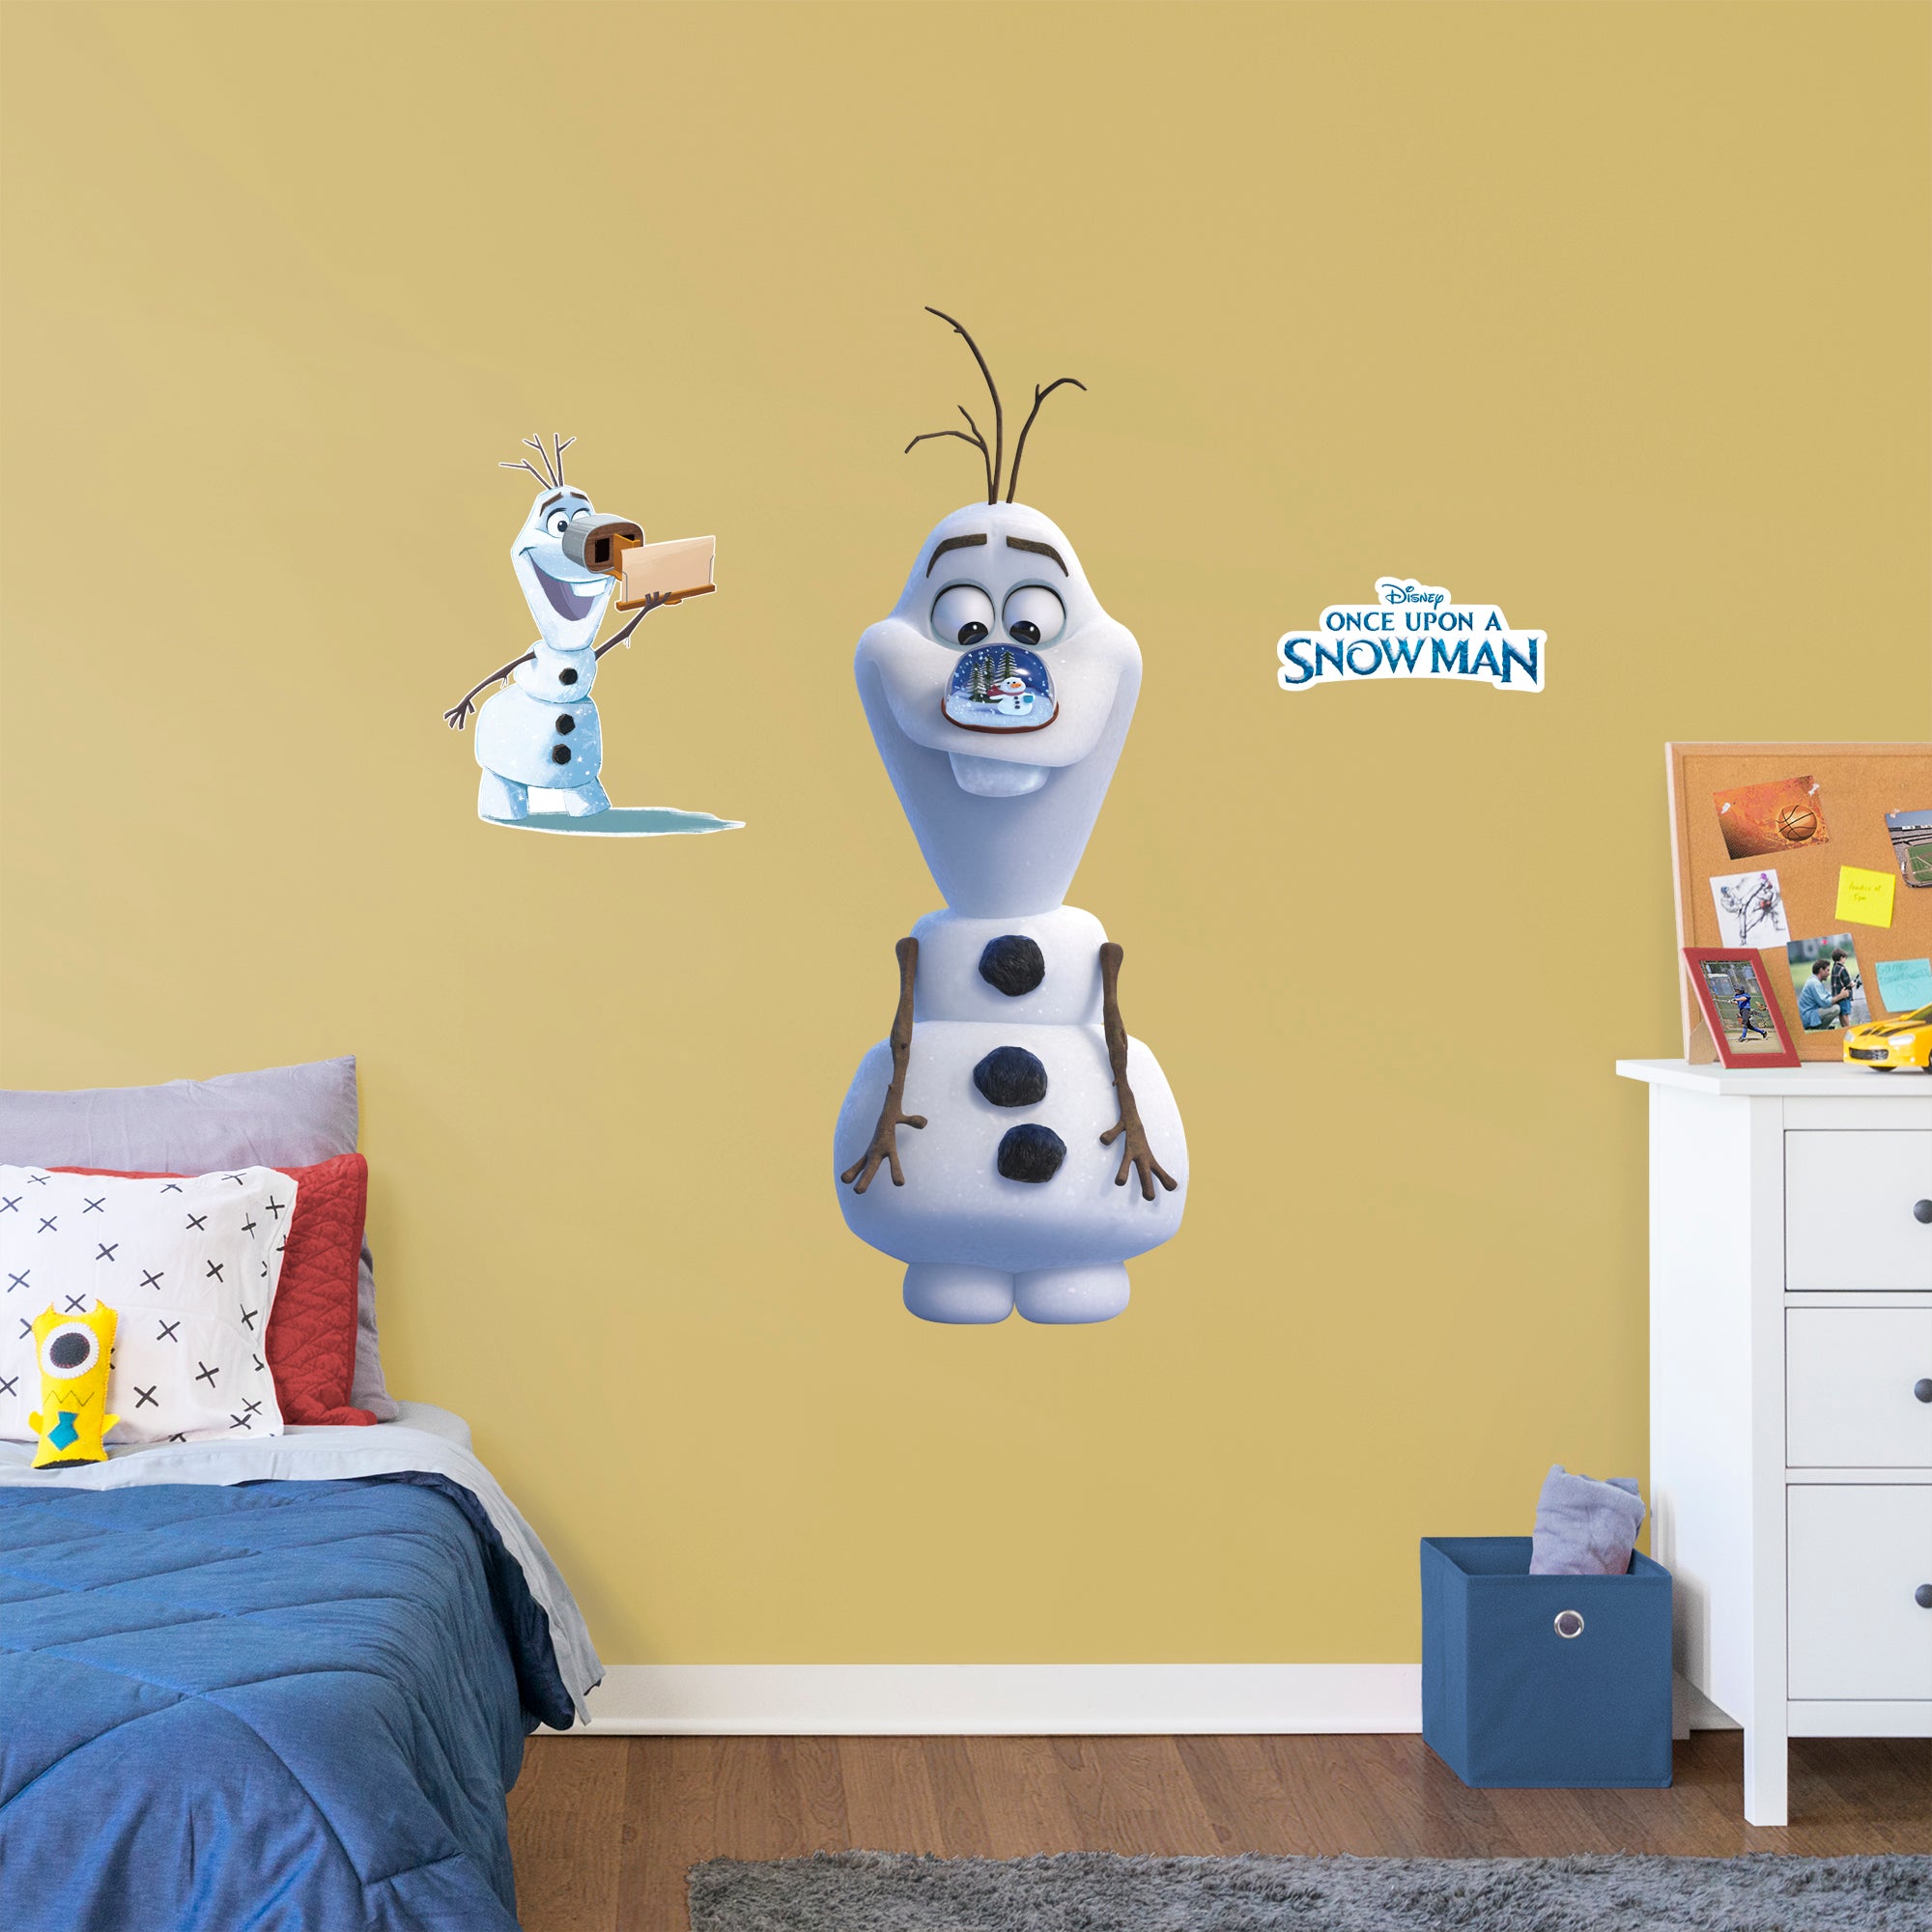 Olaf: Snowglobe - Frozen - Once Upon A Snowman - Officially Licensed Disney Removable Wall Decal Giant Character + 2 Decals by F